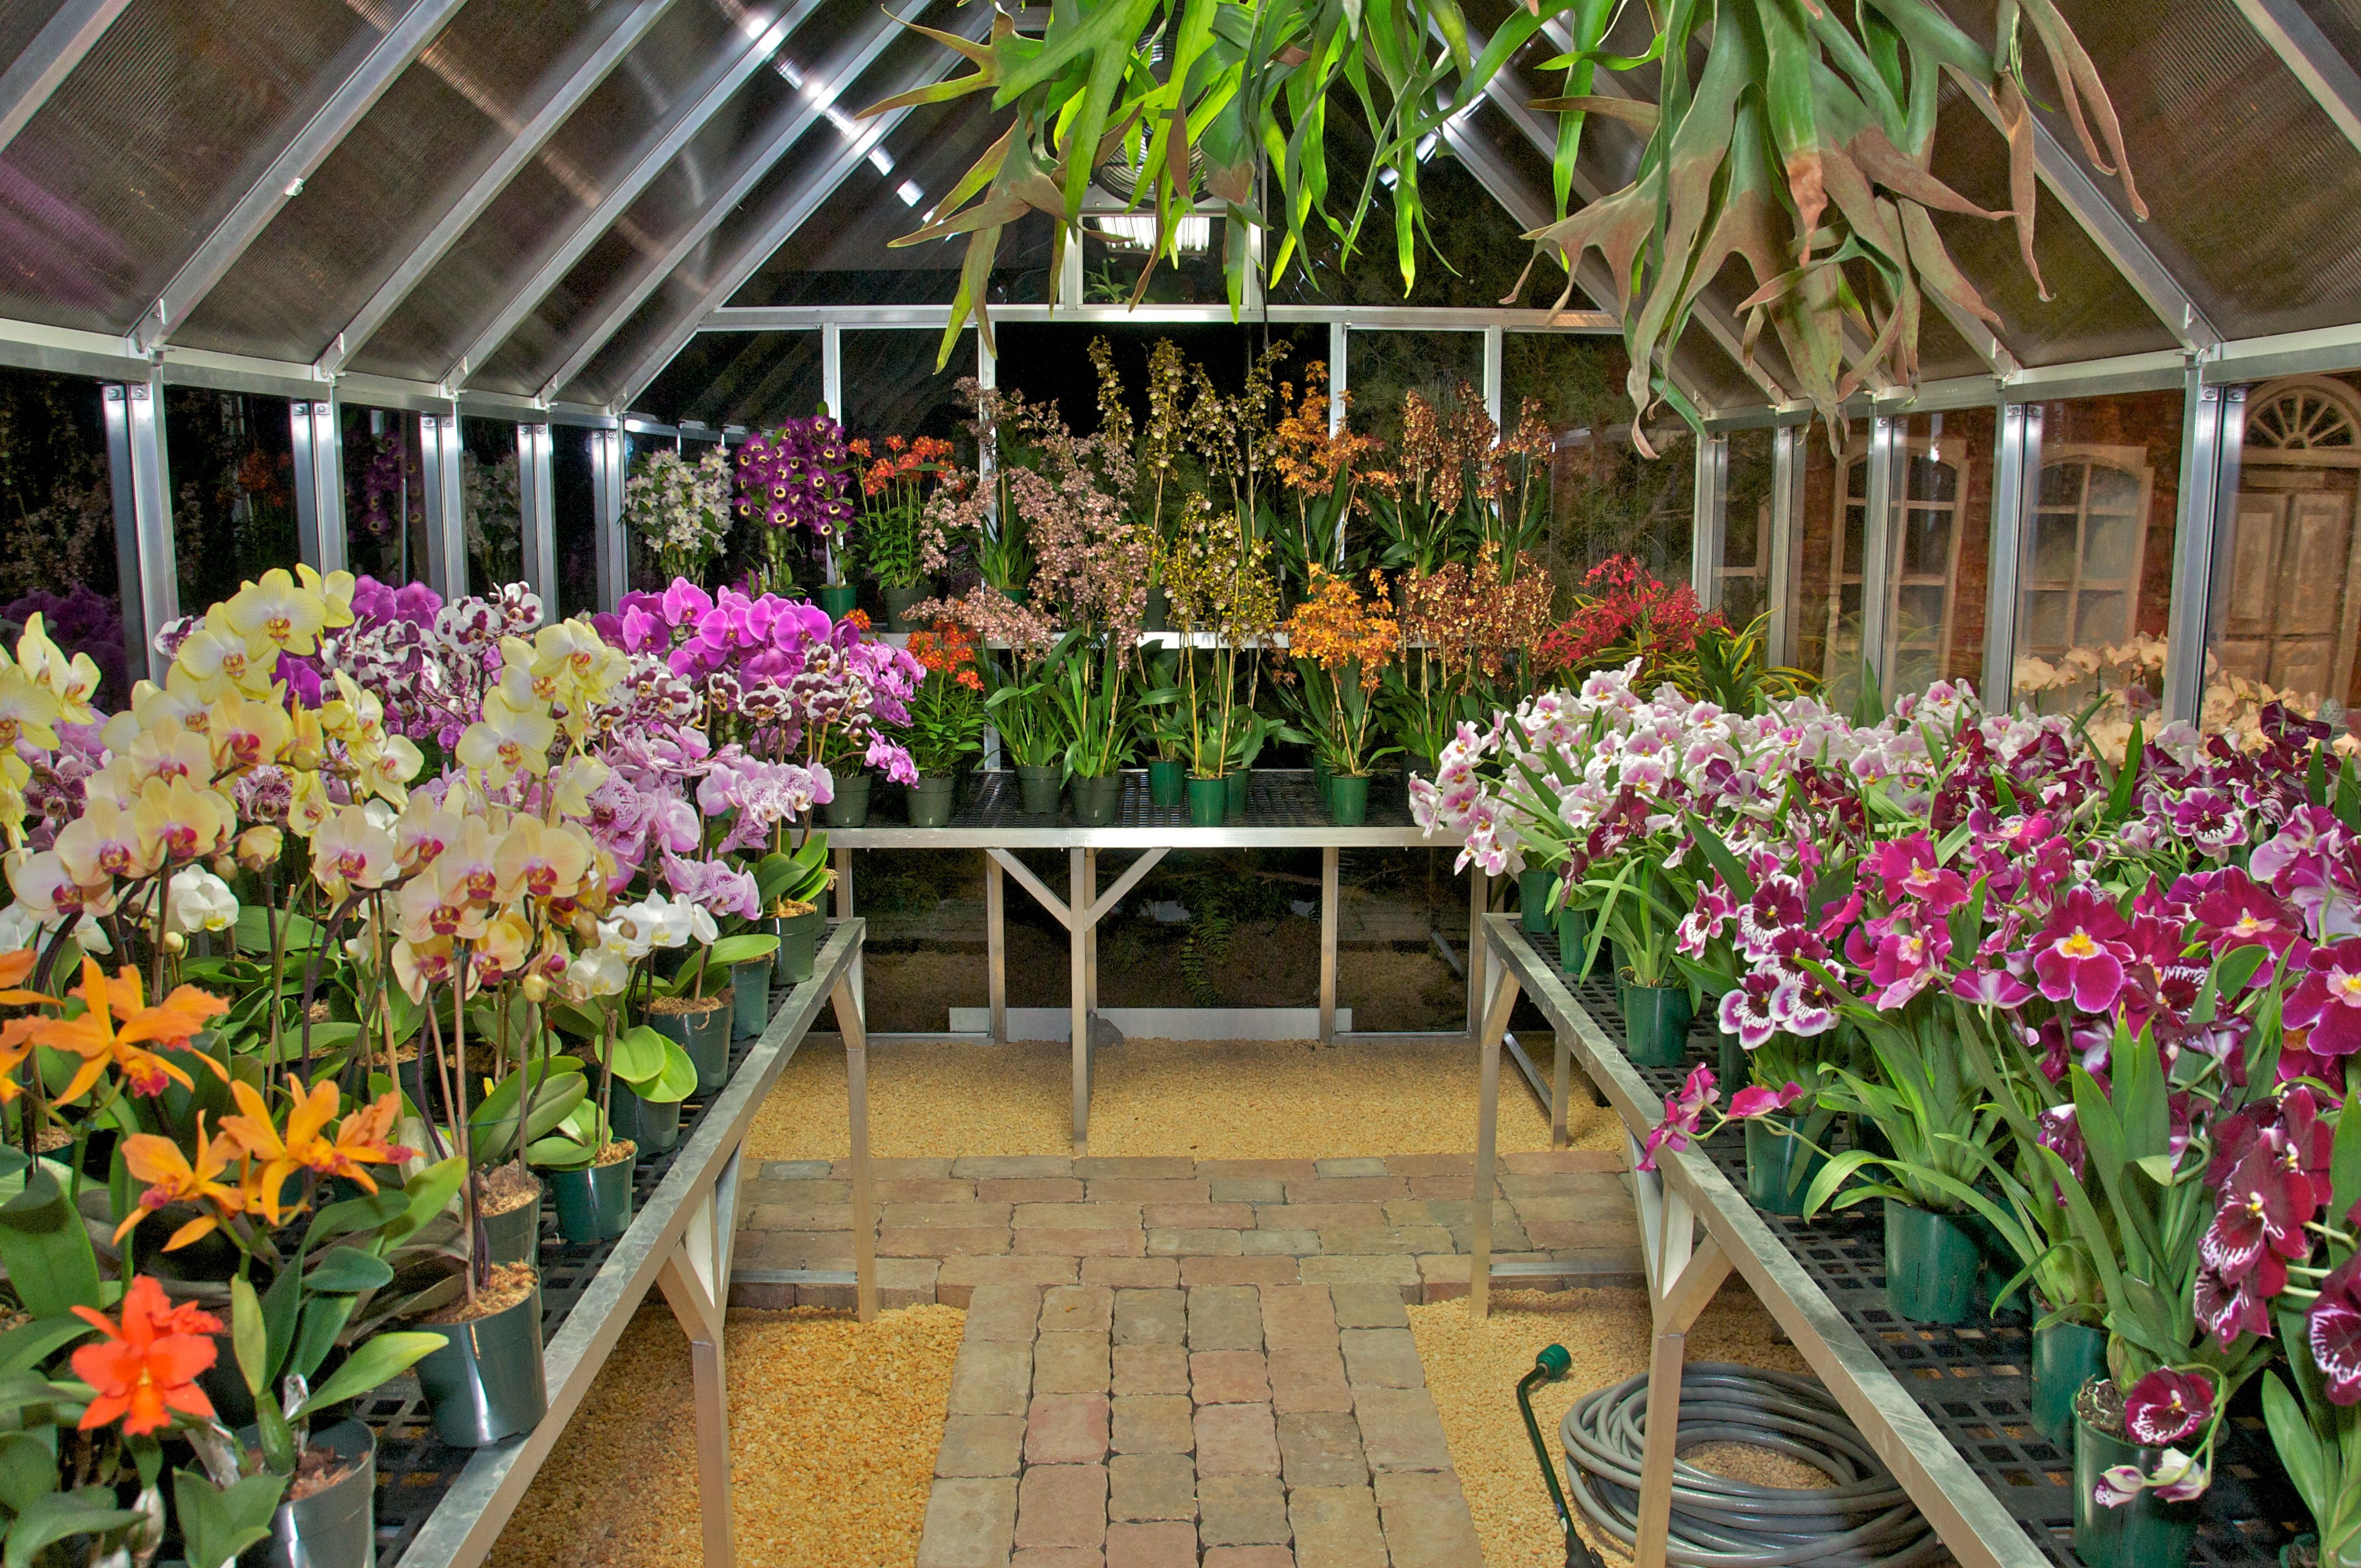 Arcadia Flower-Show-Greenhouse with Orchids | Deco | Pinterest ...